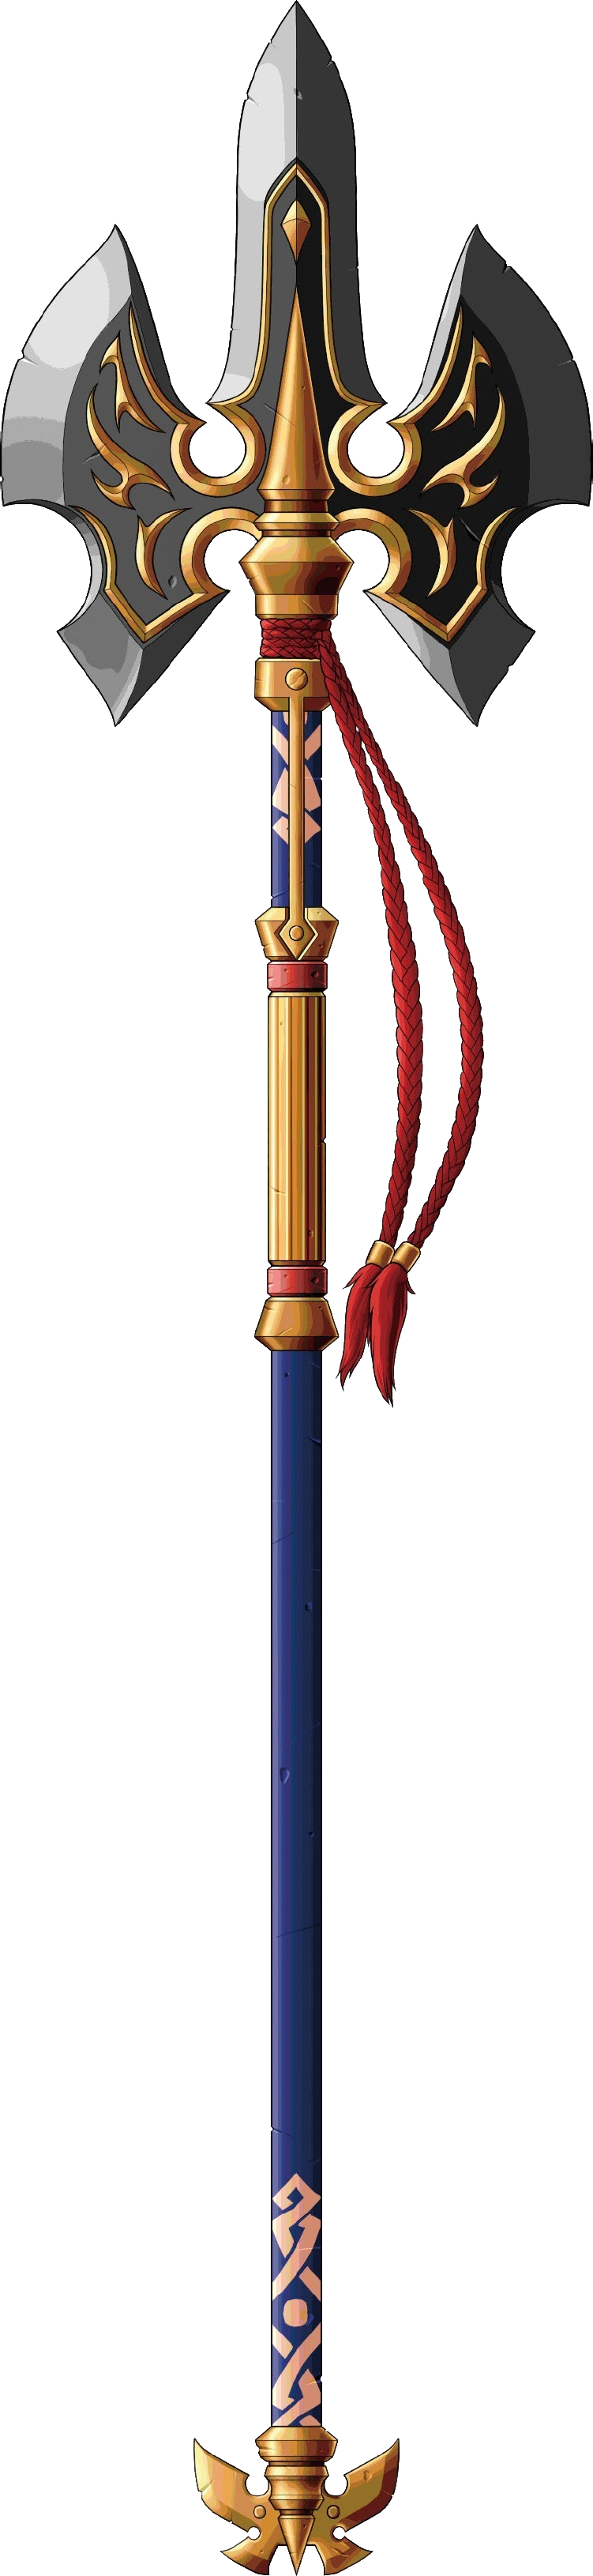 Halberd PNG HQ Picture